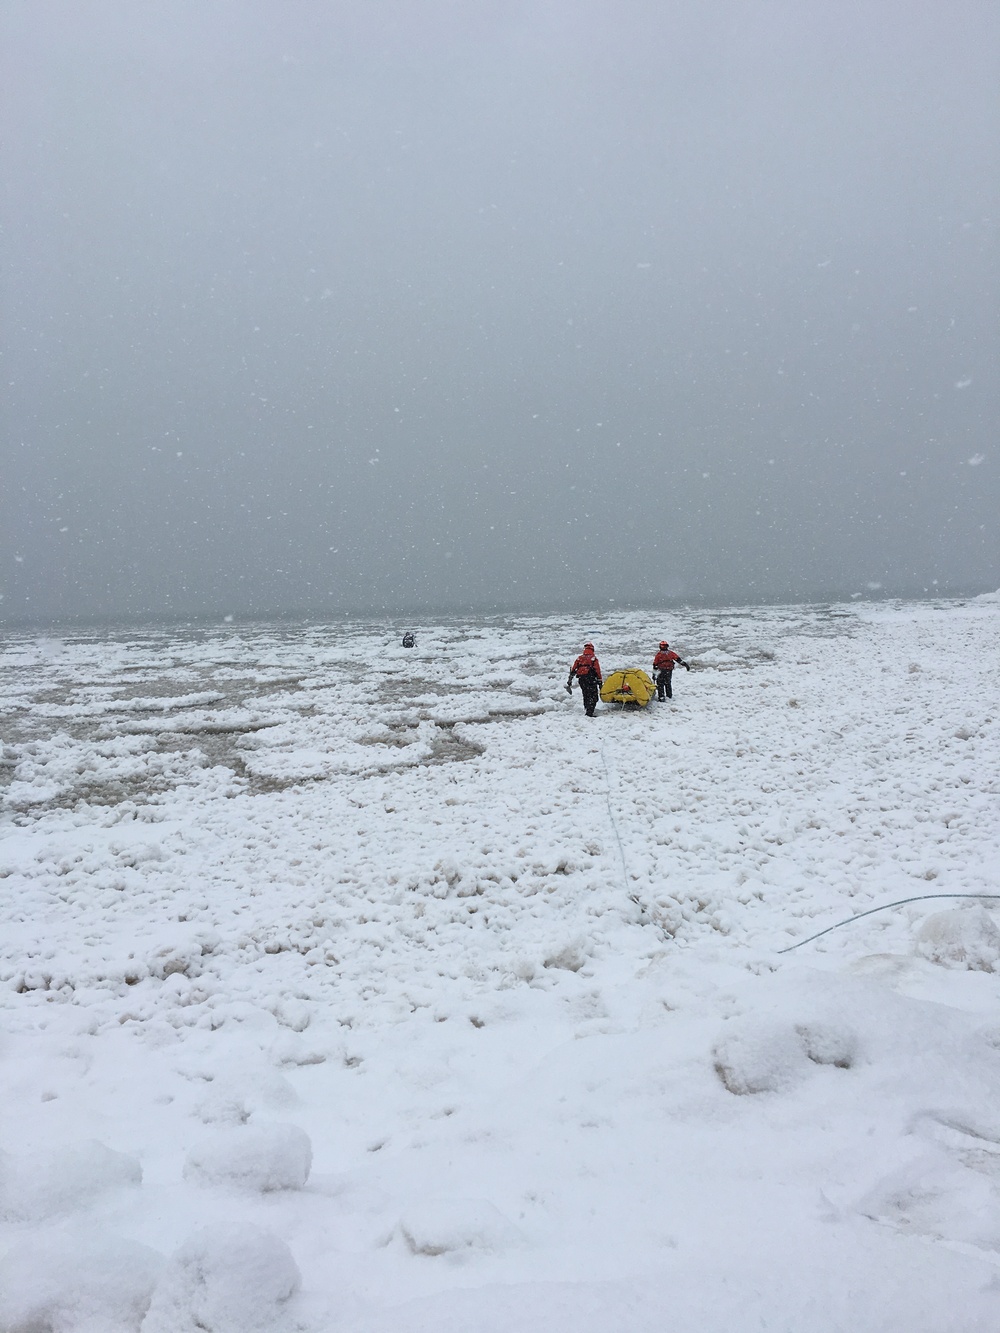 Station Rochester rescues 2 from Lake Ontario ice